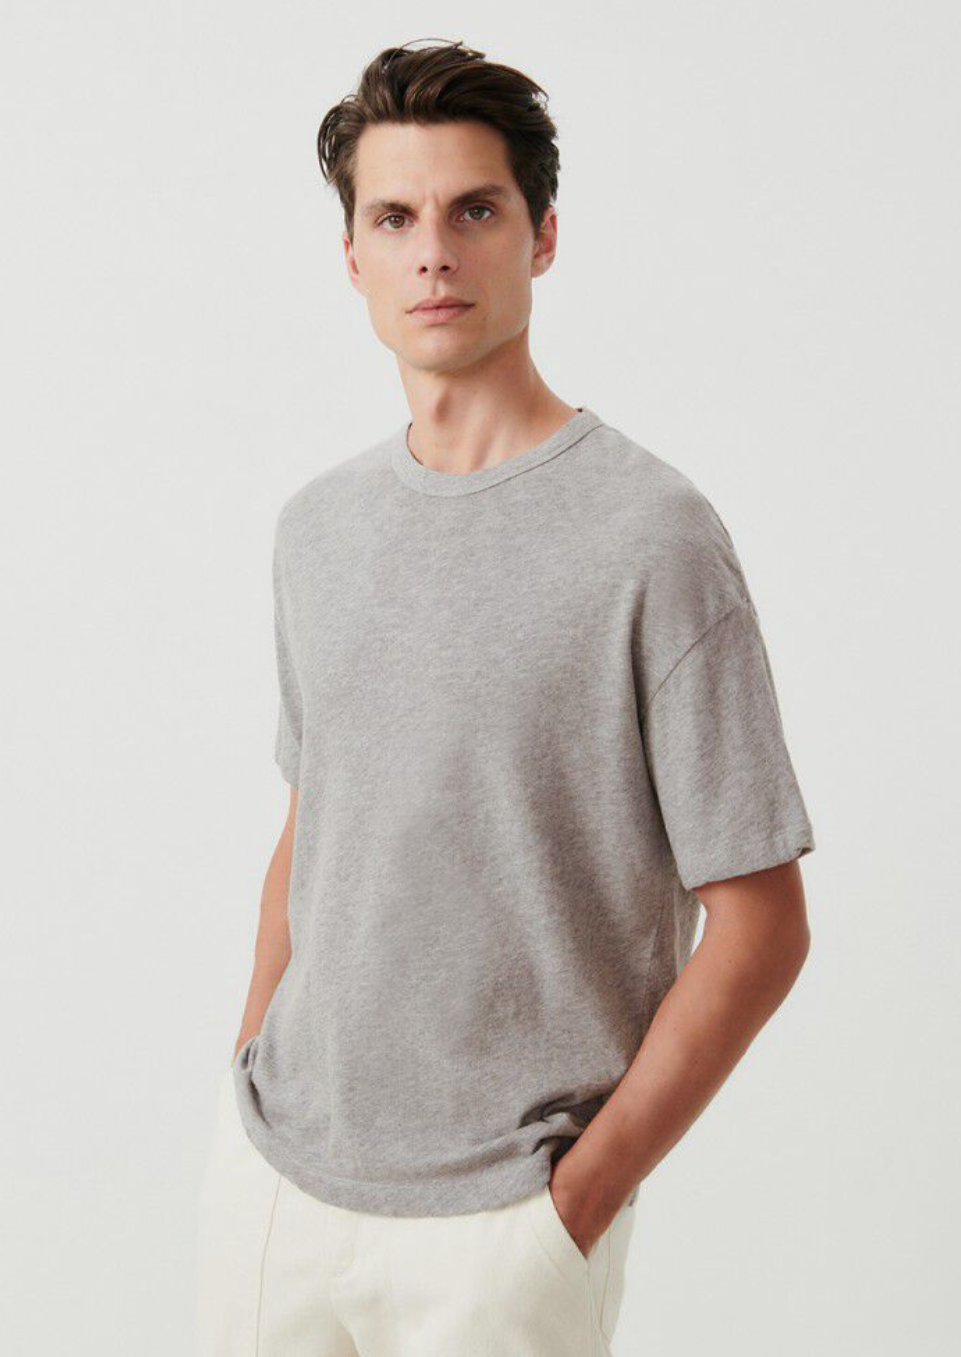 A medium close up image of a male model standing at an angle and with his hands in his pockets, wearing the Sonoma T-shirt in grey